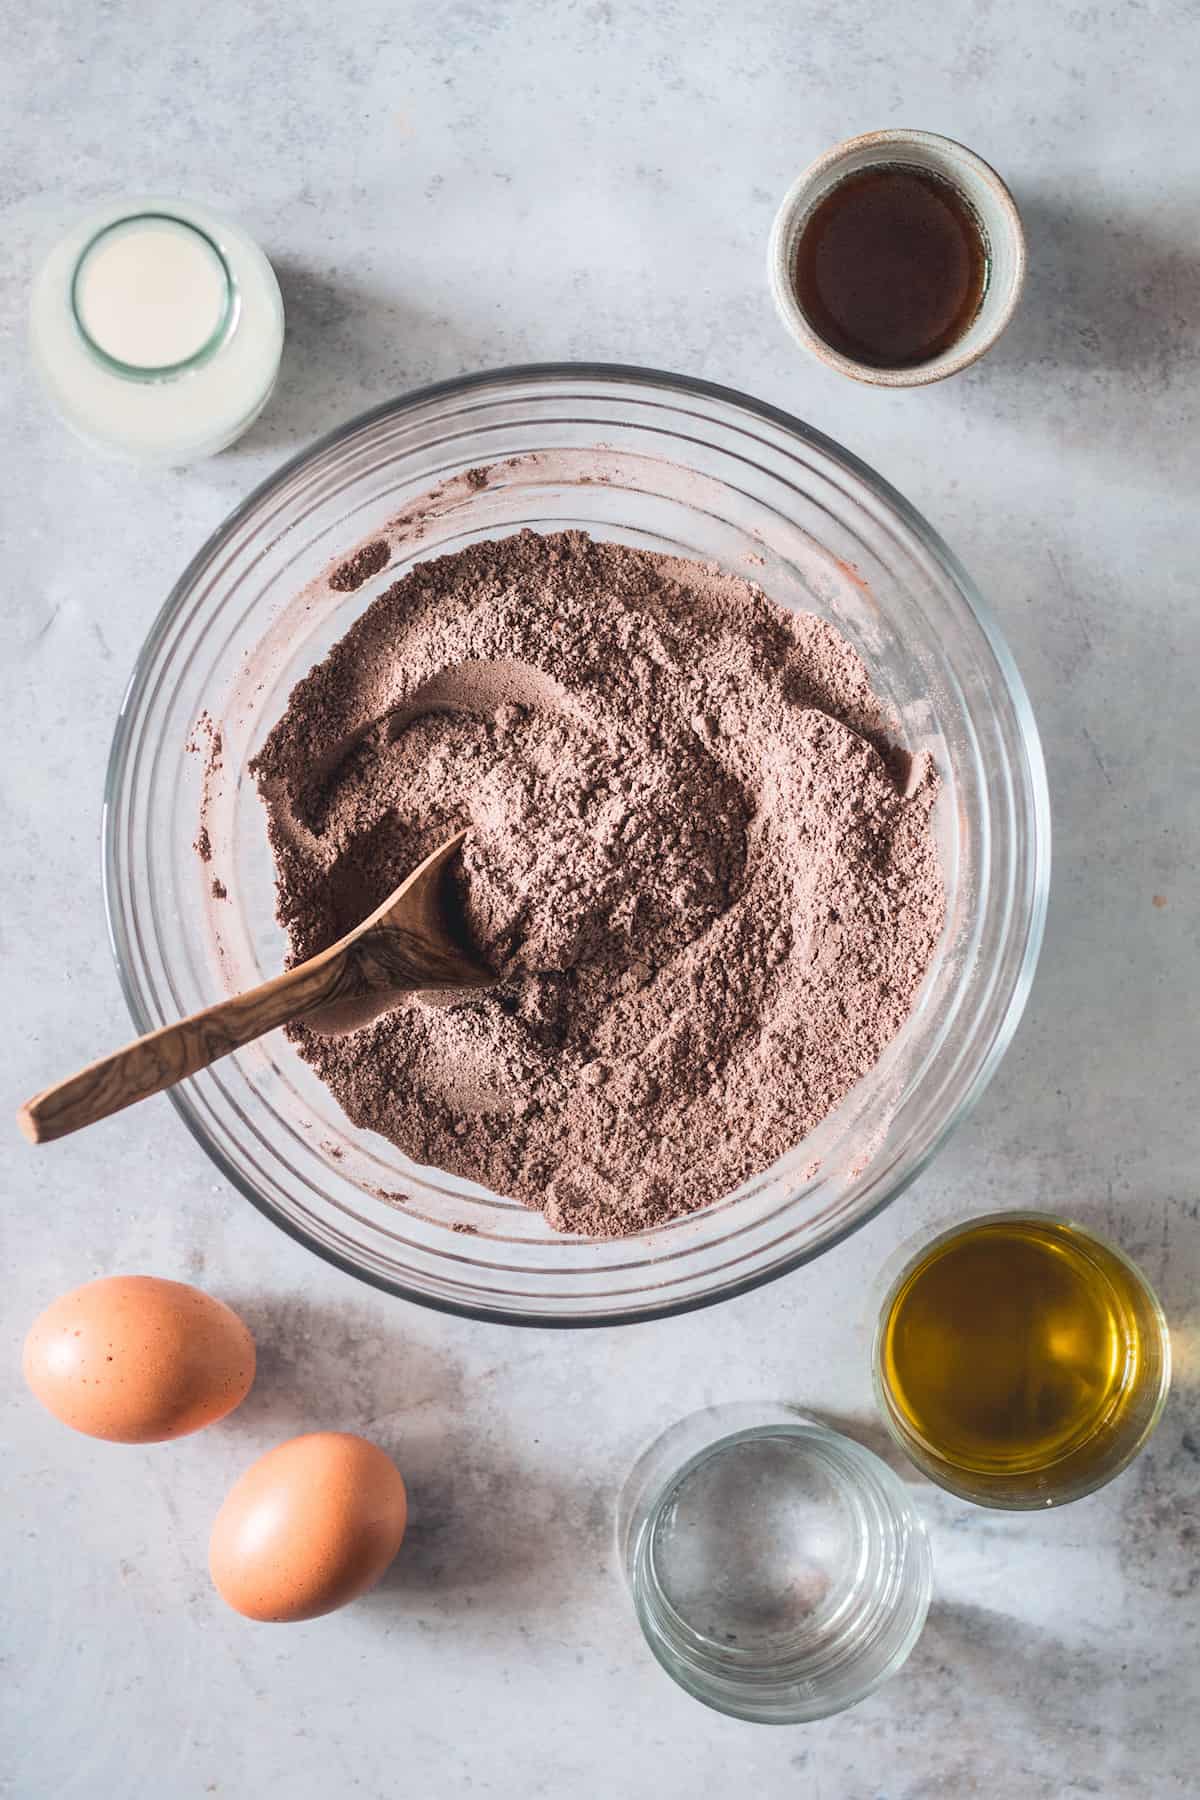 The Combined Dry Ingredients for Gluten Free Chocolate Cupcakes in a Glass Bowl